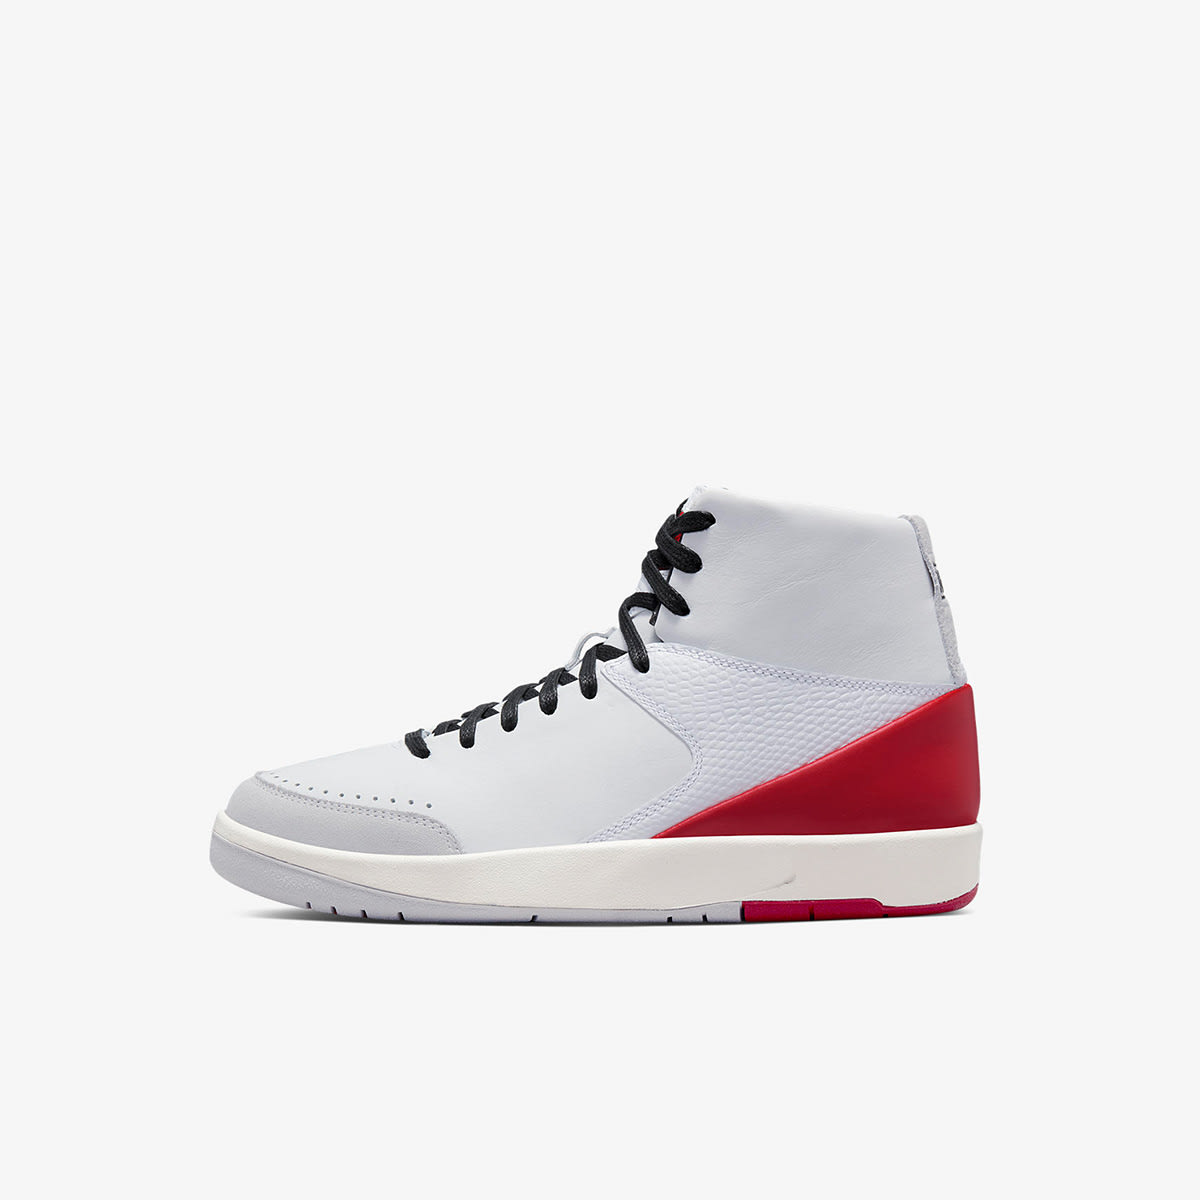 Air Jordan x Nina Chanel Abney 2 Retro (White & Gym Red) | END. Launches